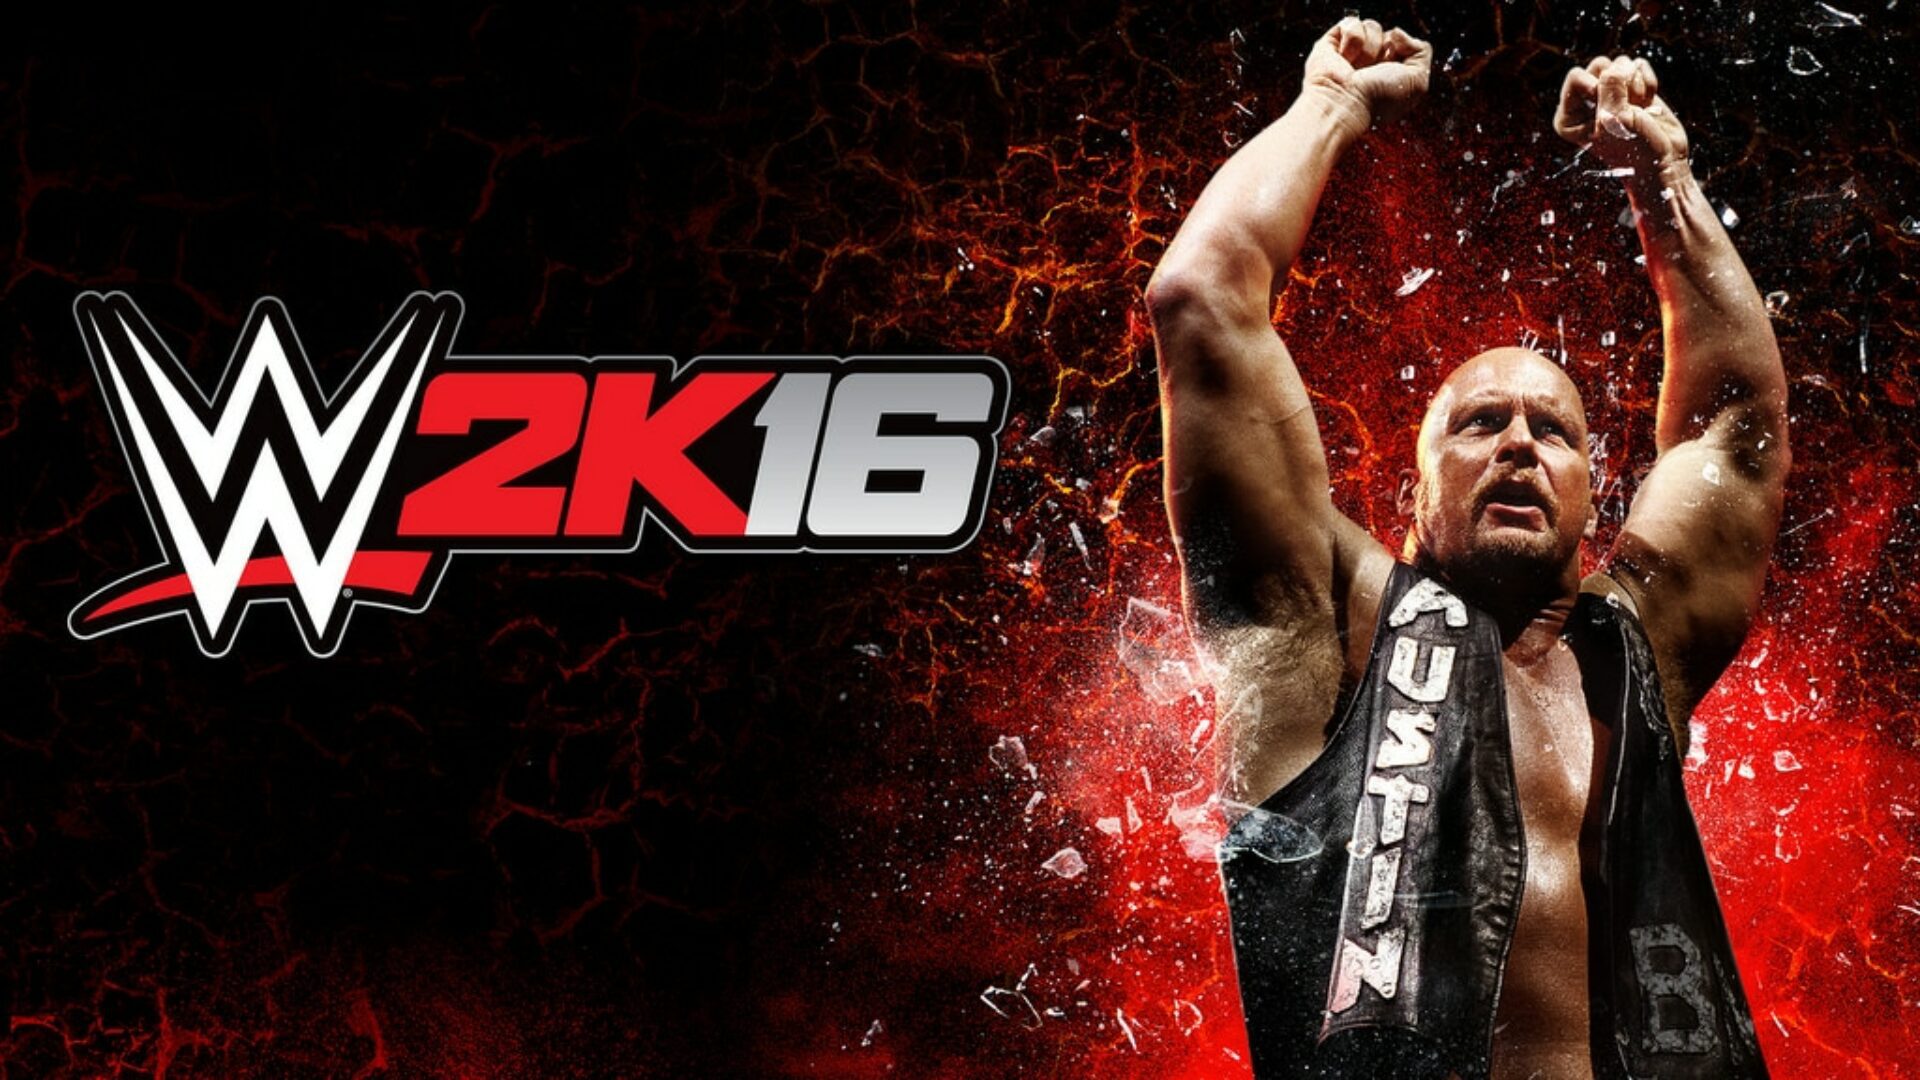 WWE 2K16 Grapples Its Way to PC This March